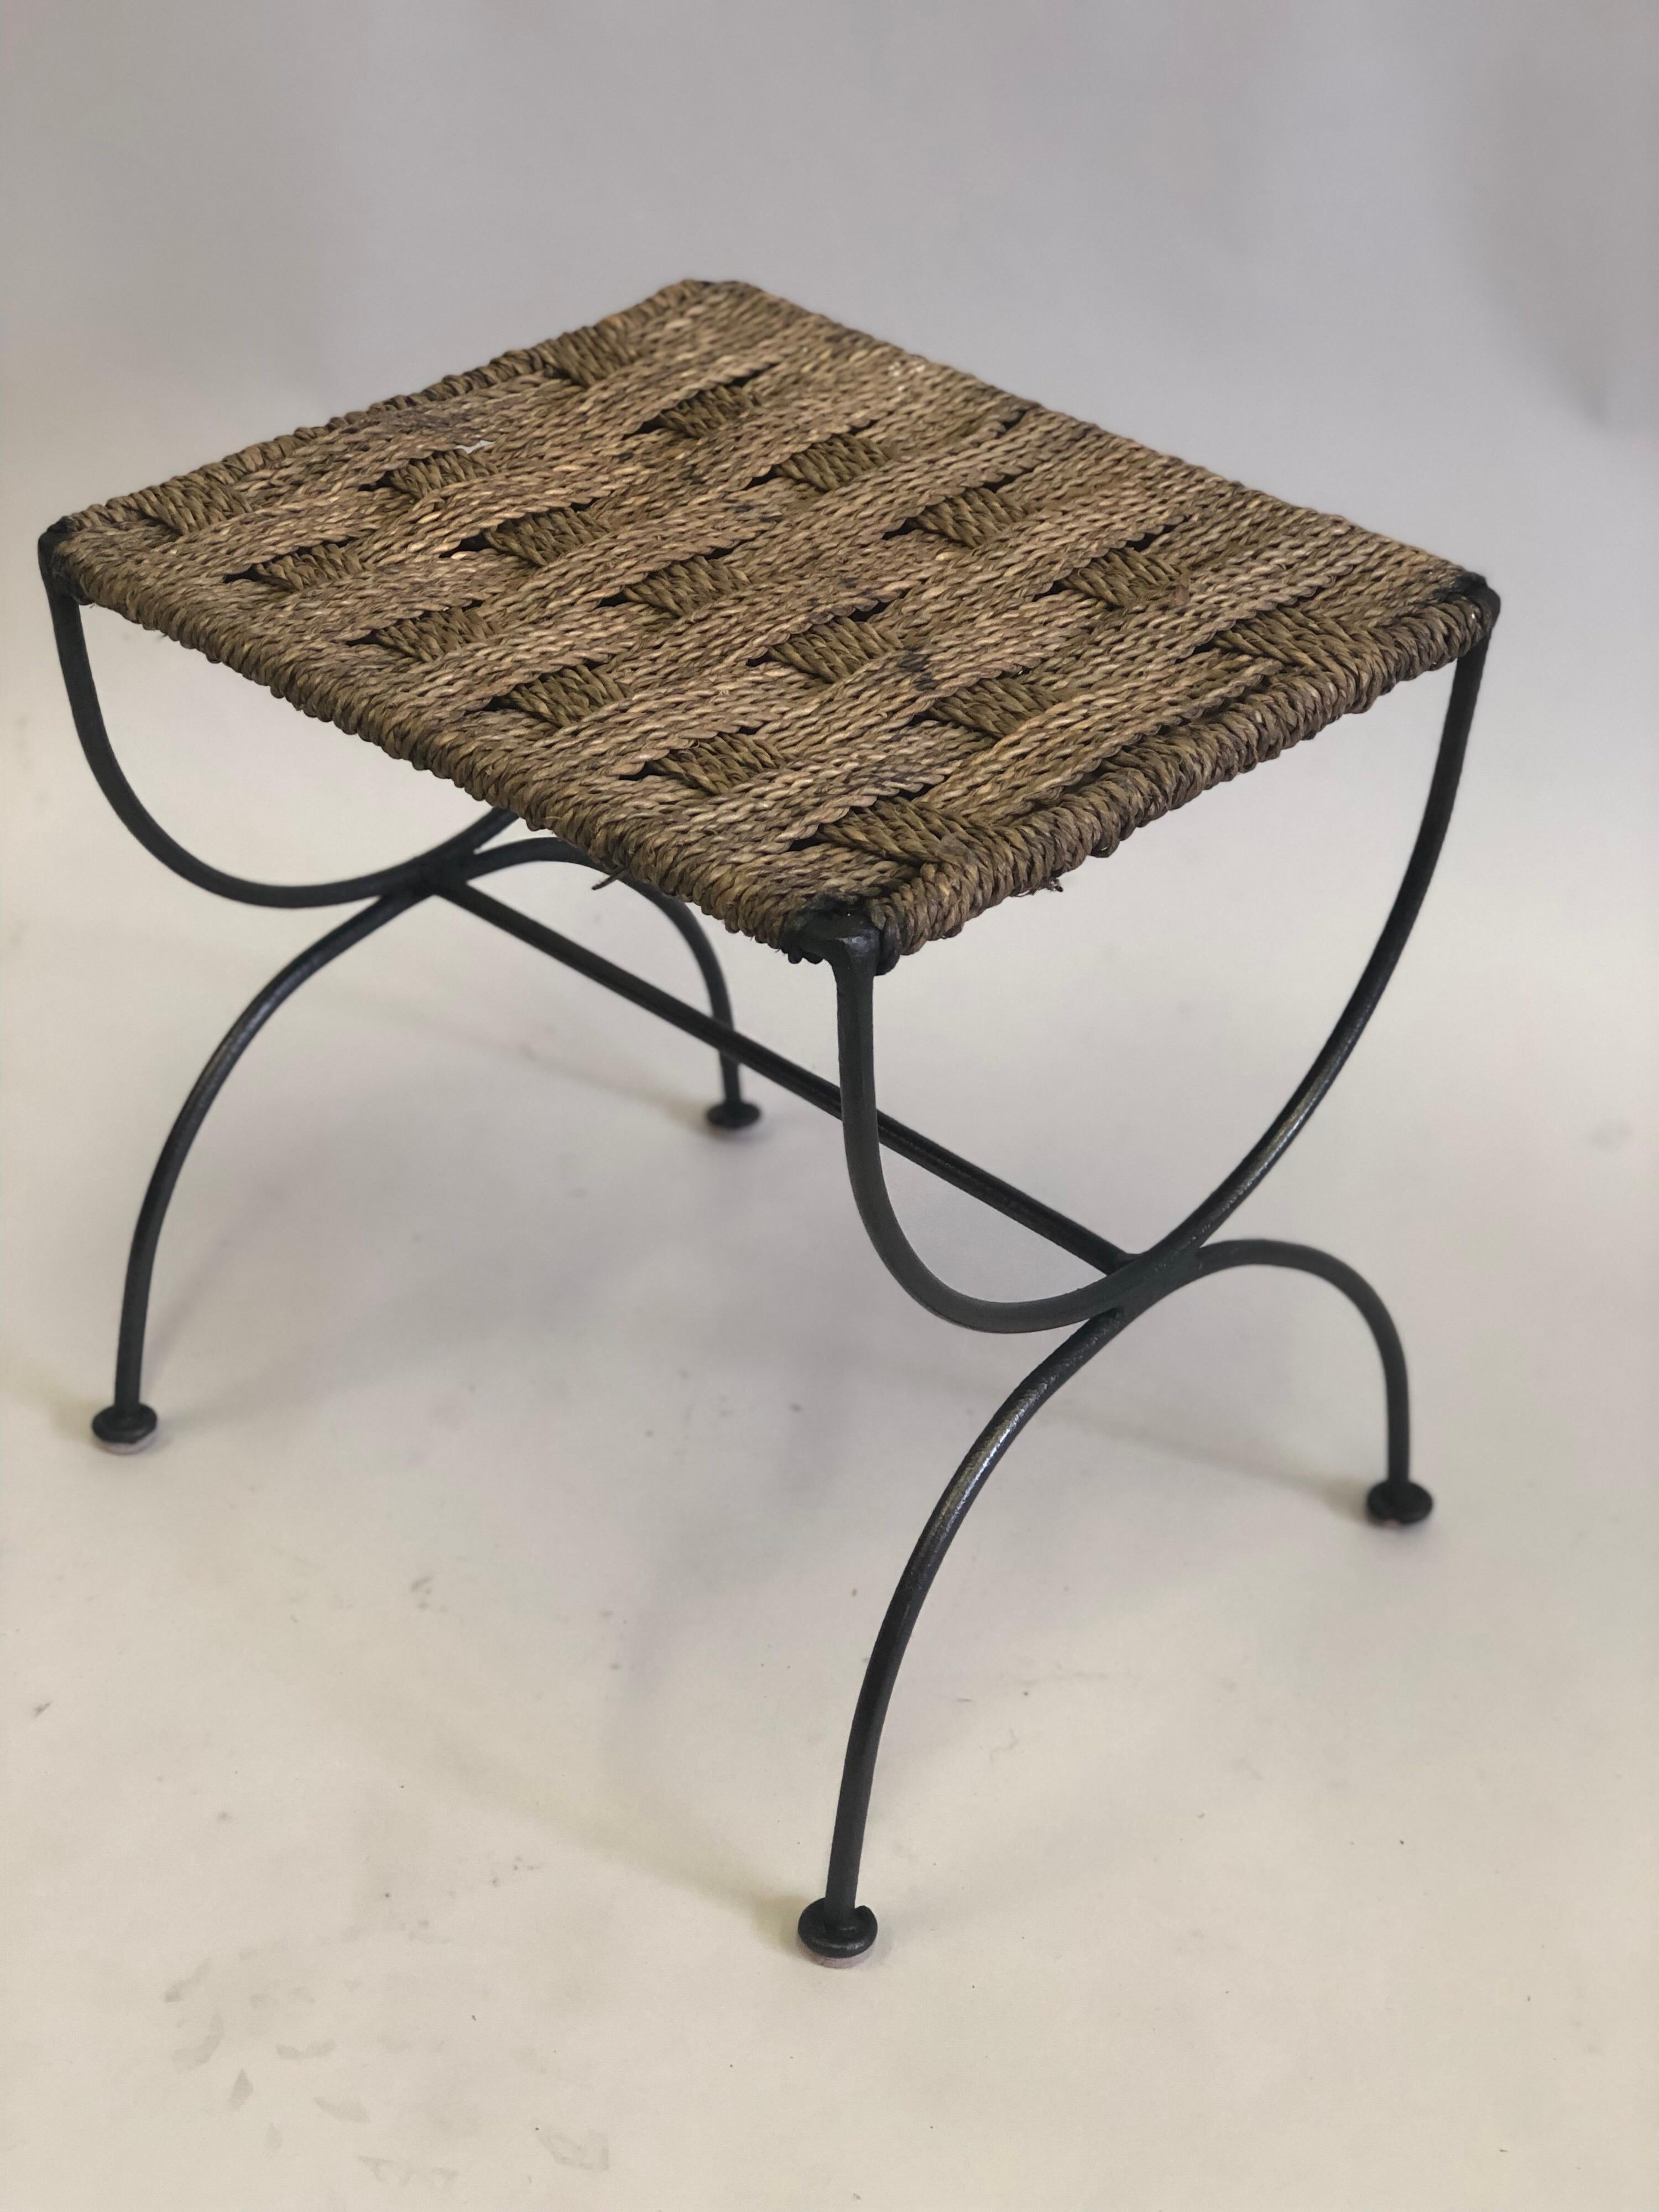 20th Century Pair of French Mid-Century Wrought Iron & Rope Stools / Benches, Audoux & Minet. For Sale